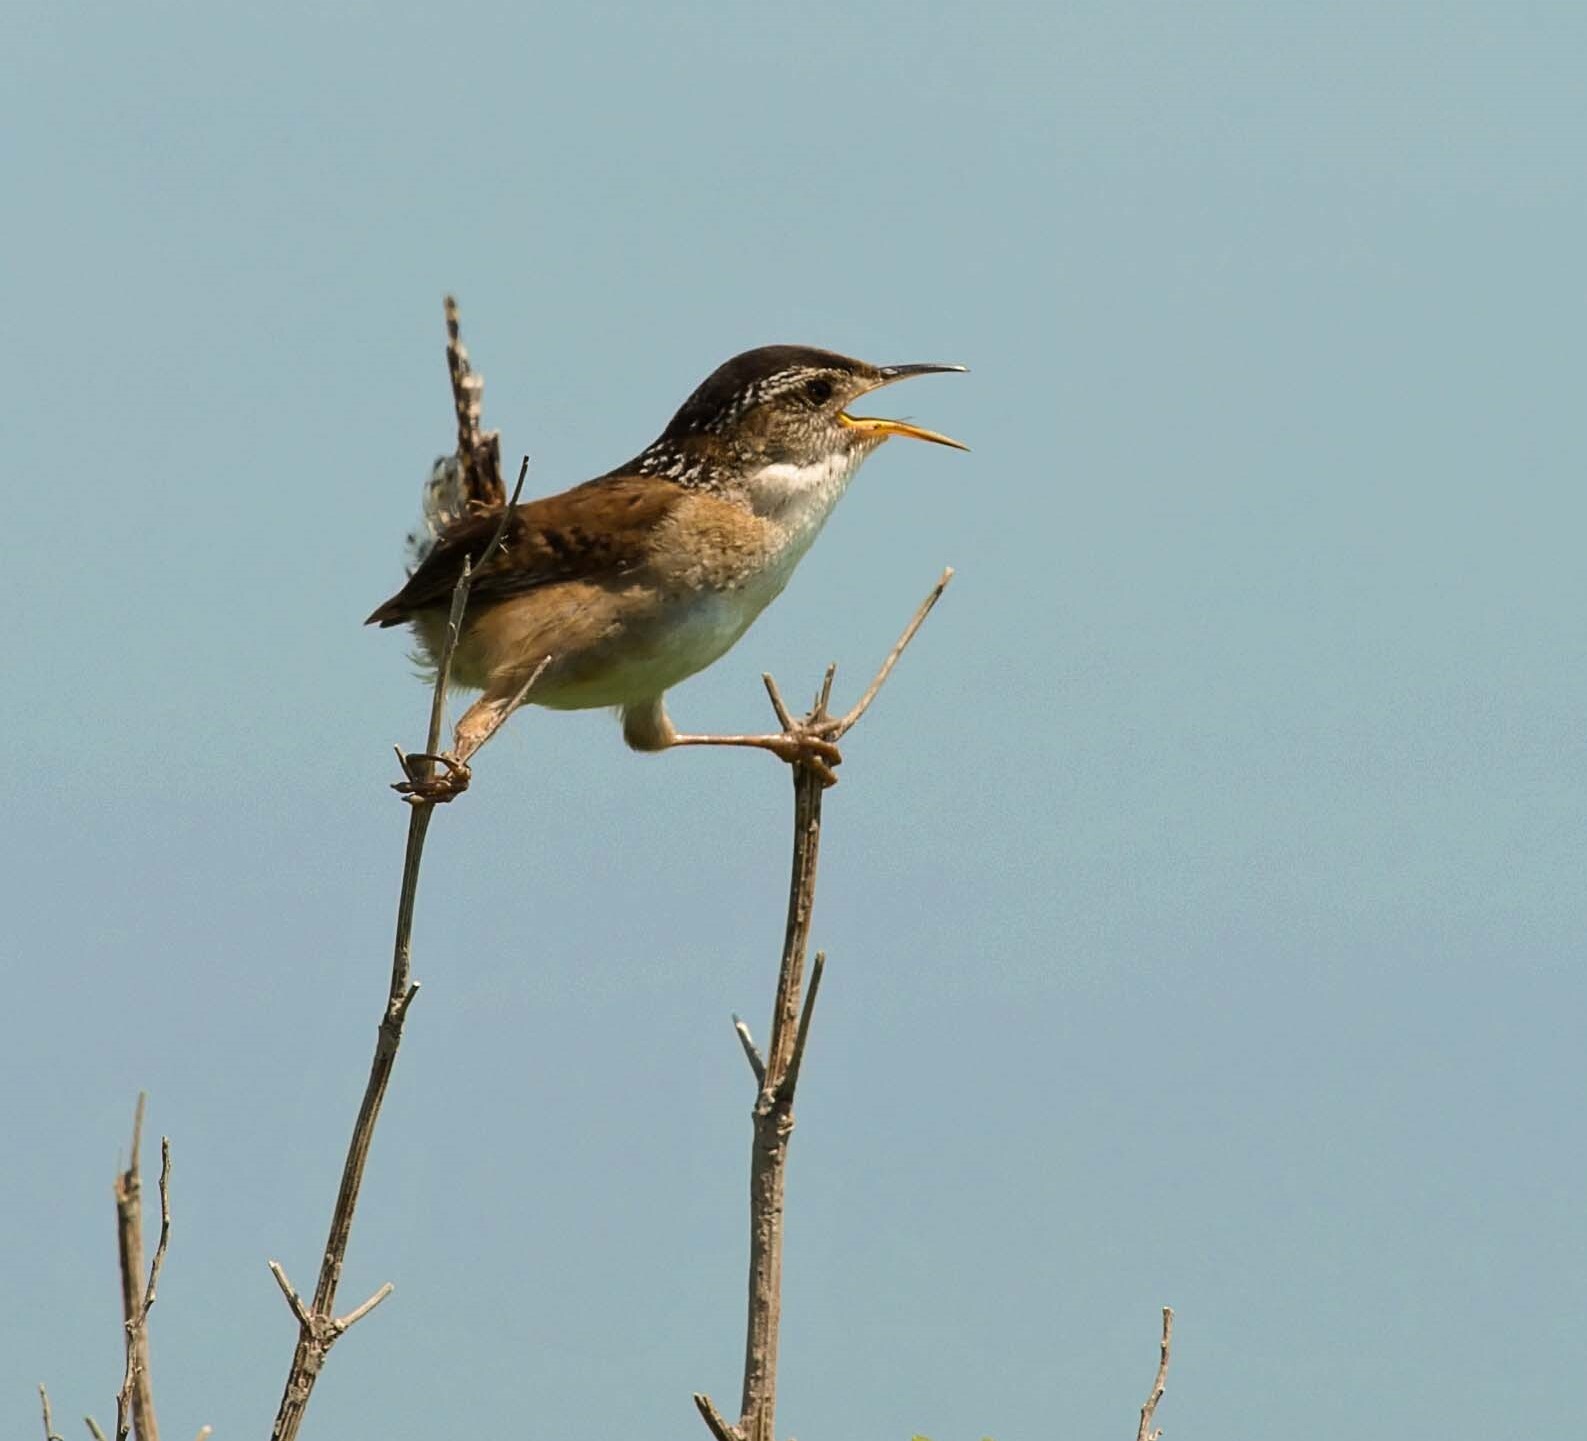 The Marsh Wren's reedy song can be heard during breeding season in Brookfield Park. <a href="https://www.flickr.com/photos/puttefin/3630379543/" target="_blank">Photo</a>: Kelly Colgan Azar/<a href="https://creativecommons.org/licenses/by-nd/2.0/" target="_blank">CC BY-ND 2.0</a>